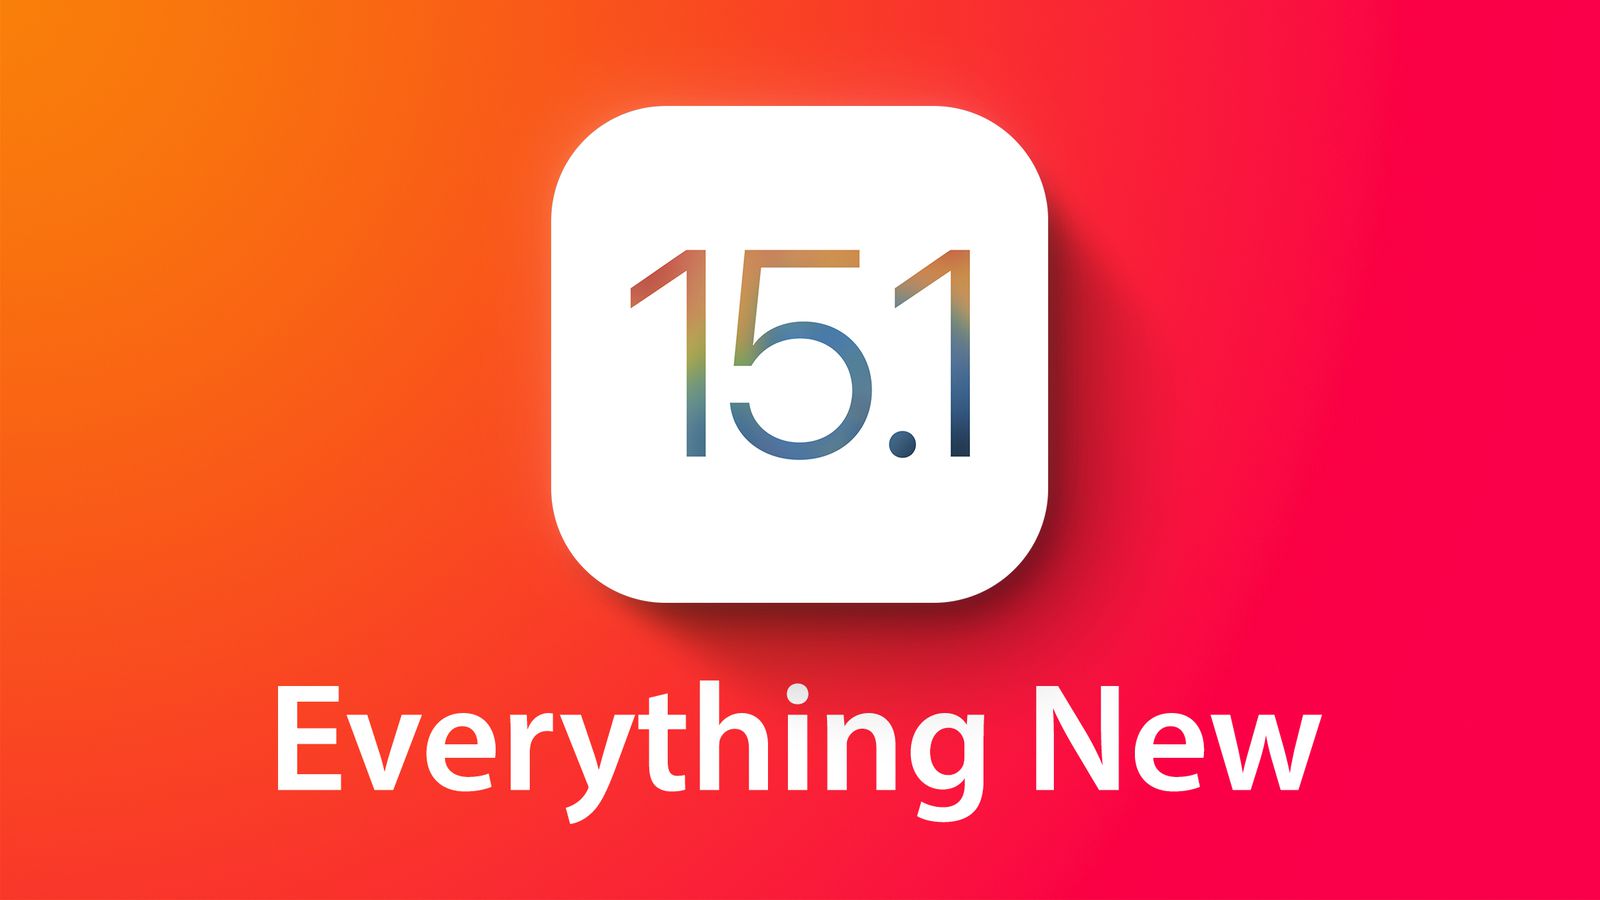 Ios 15 1 Features Everything New In Ios 15 1 Macrumors